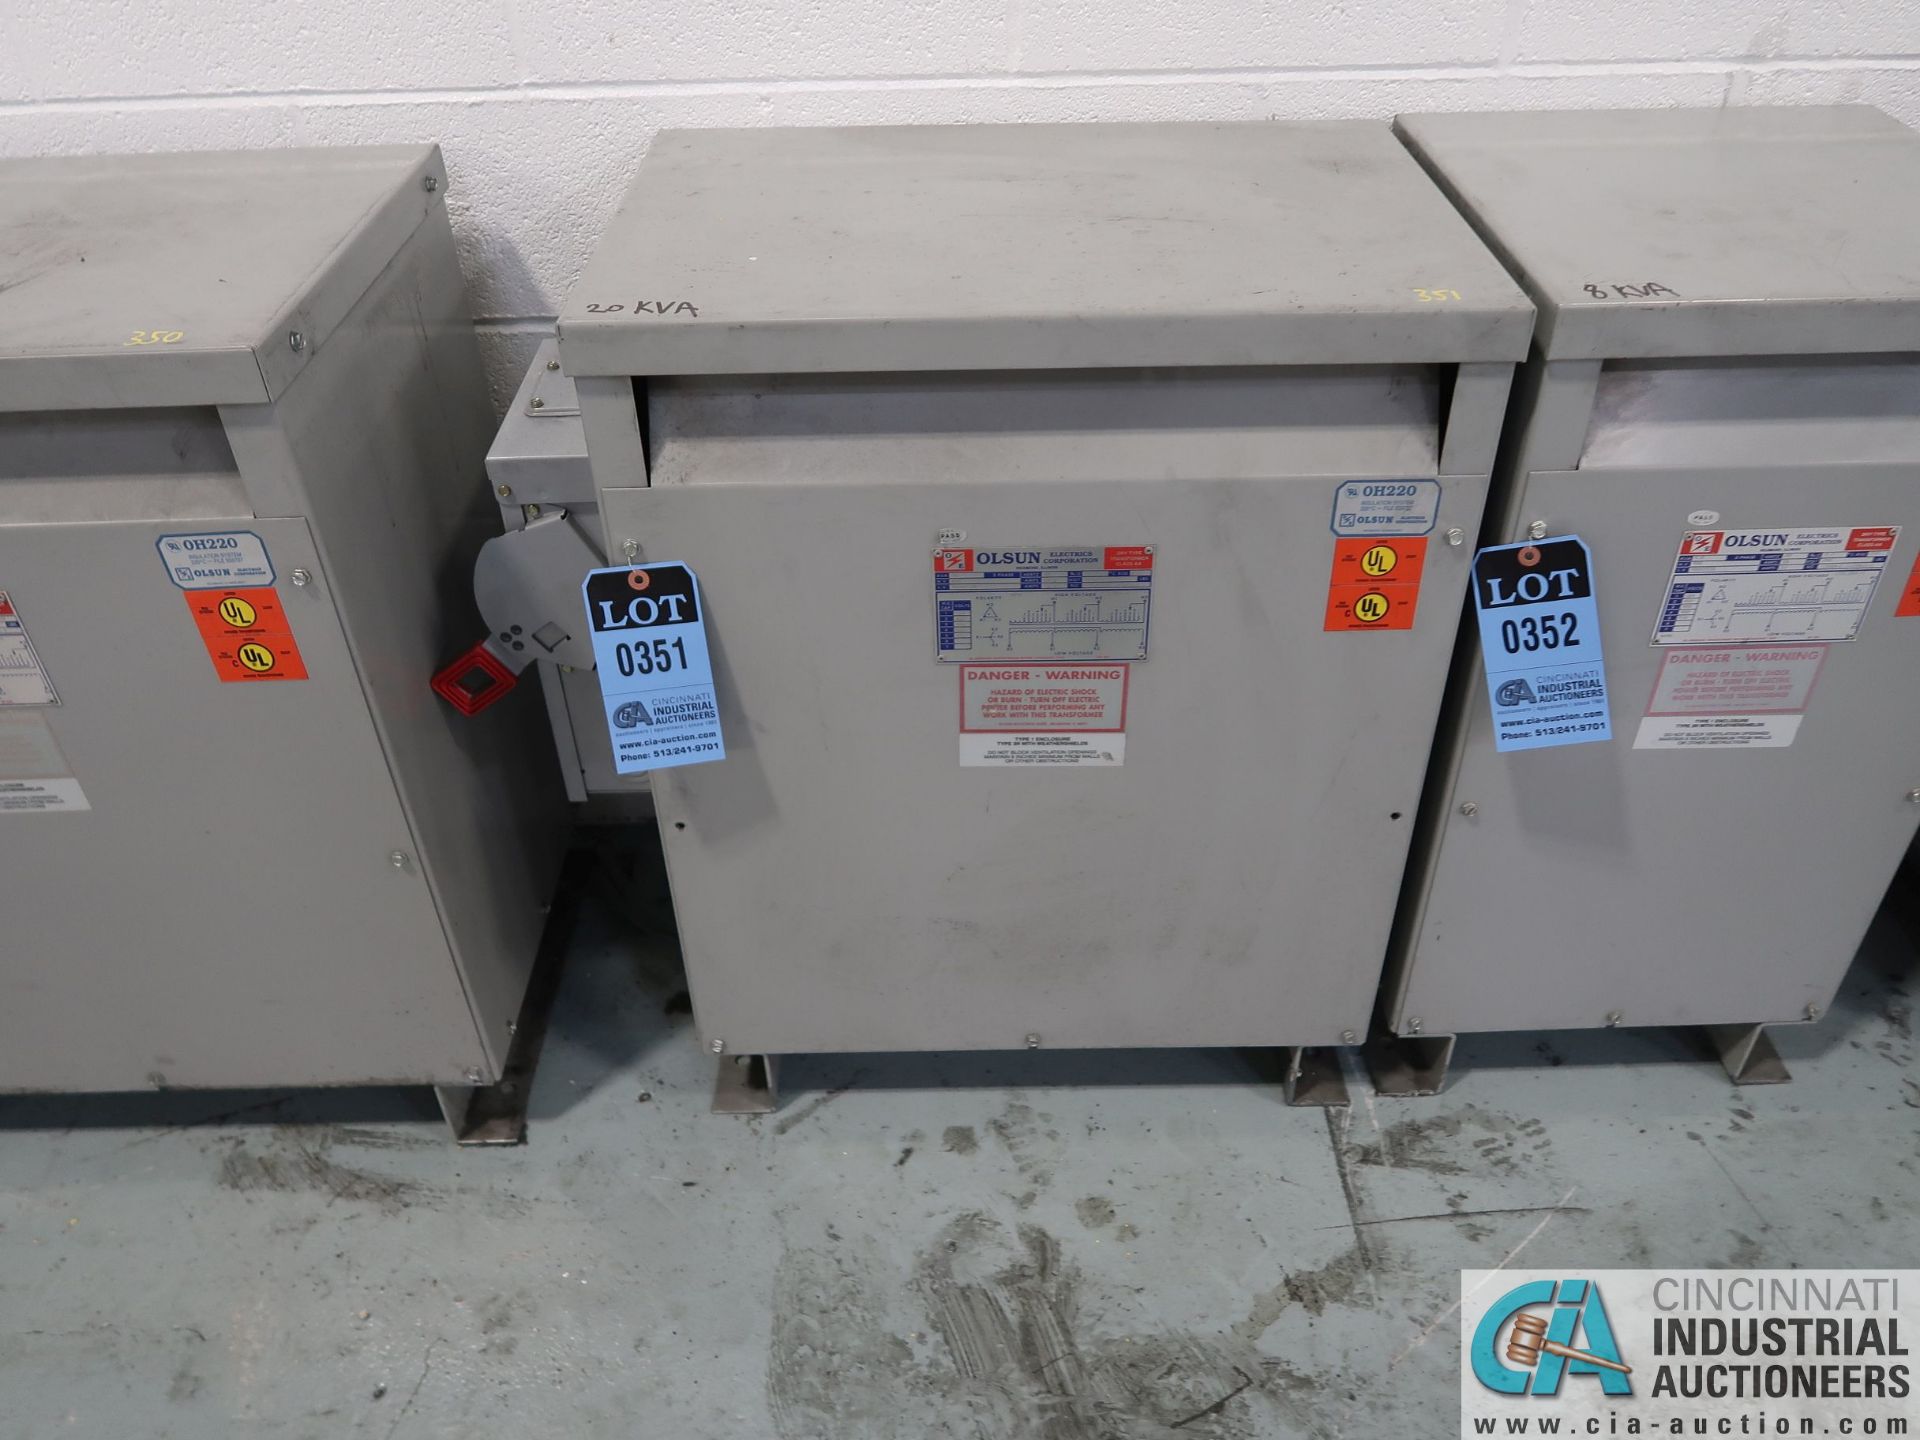 20 KVA OLSUN DRY TYPE TRANSFORMER *$25.00 RIGGING FEE DUE TO INDUSTRIAL SERVICES AND SALES*